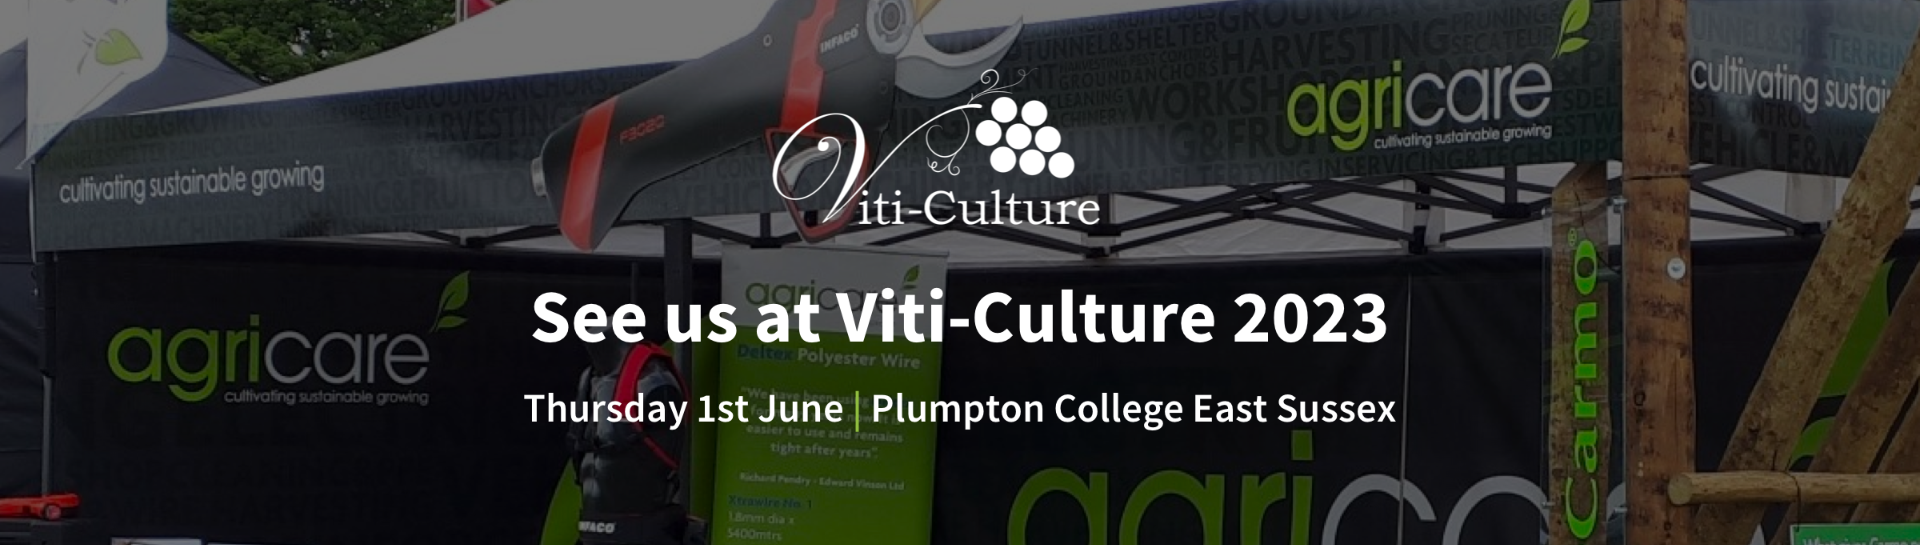 See us at Viti-Cultire 2023. Thursday 1st June, Plumpton College East Sussex